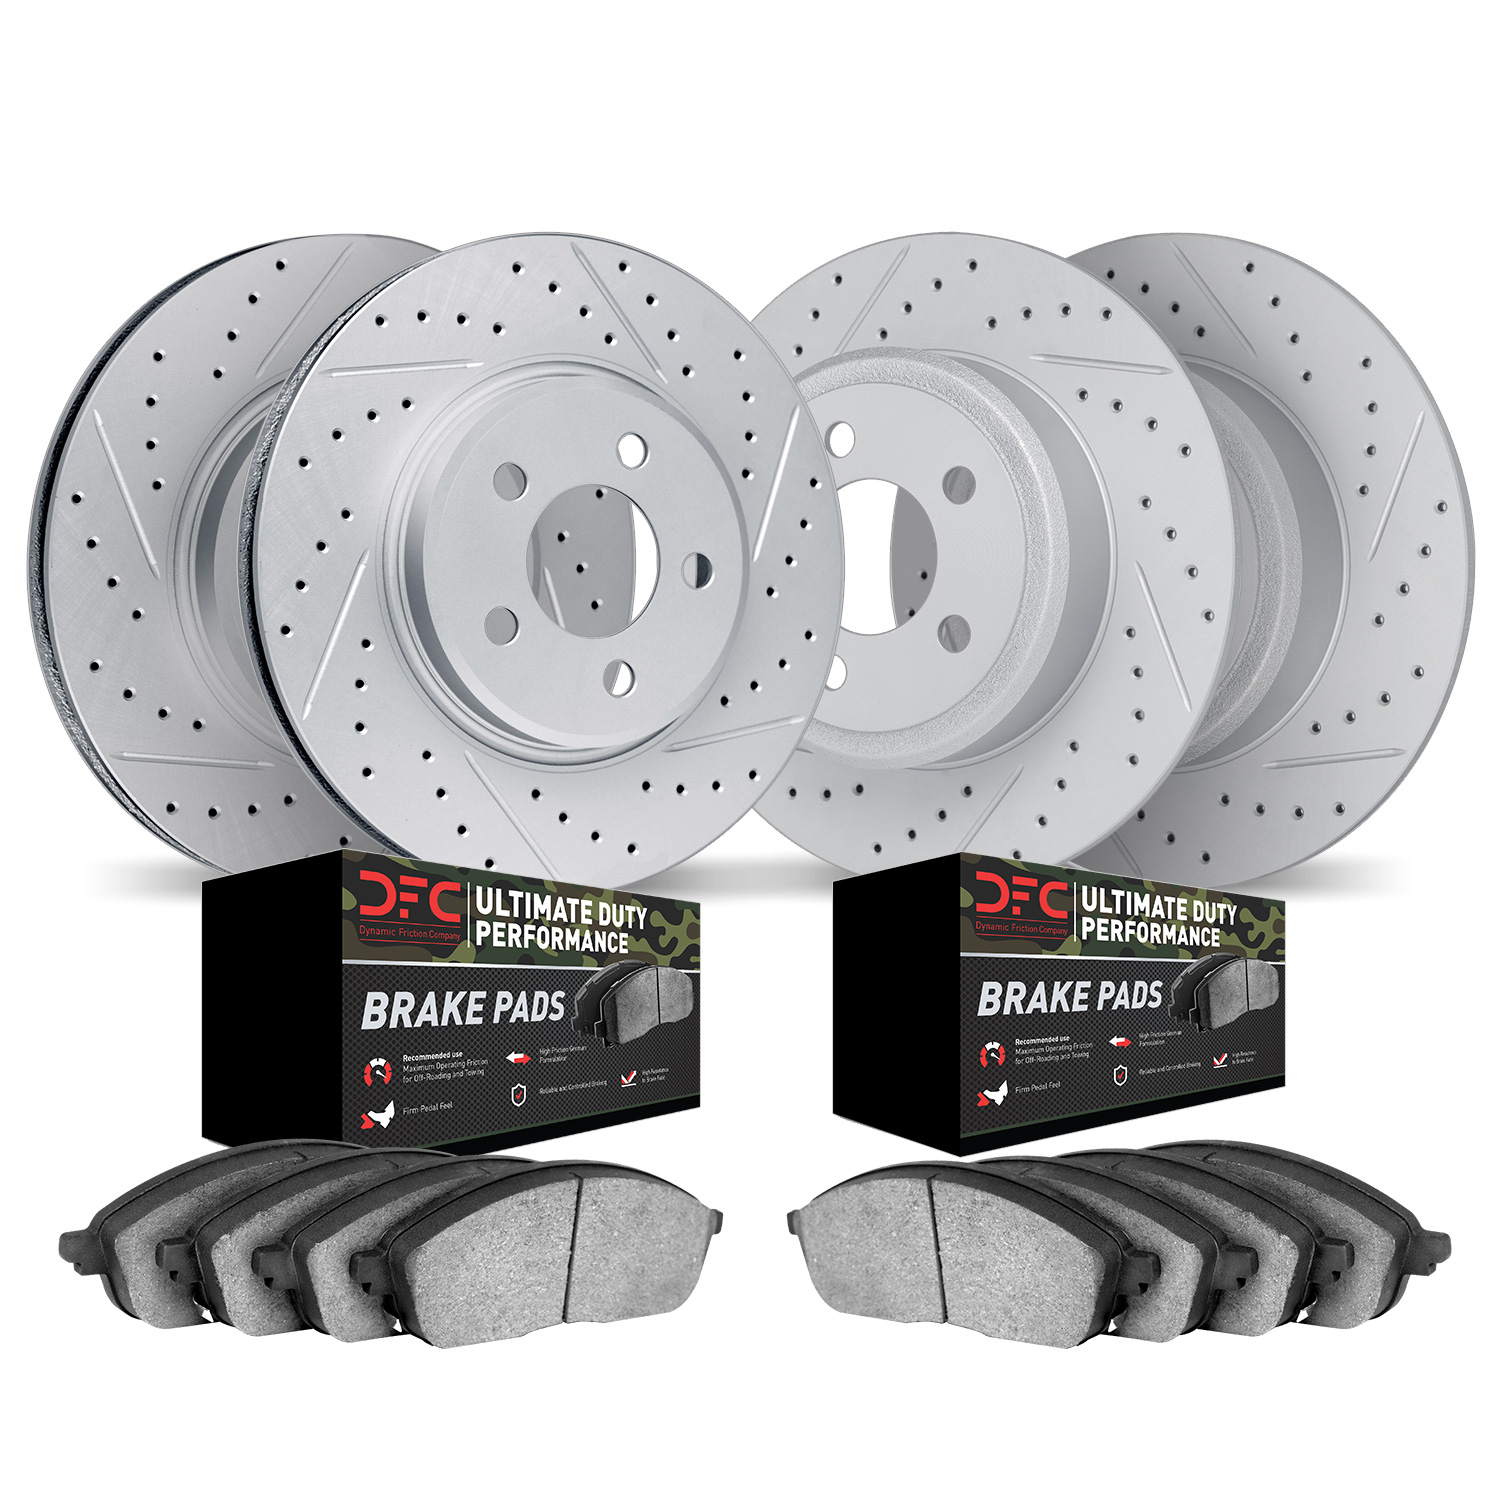 2404-42019 Geoperformance Drilled/Slotted Brake Rotors with Ultimate-Duty Brake Pads Kit, Fits Select Mopar, Position: Front and